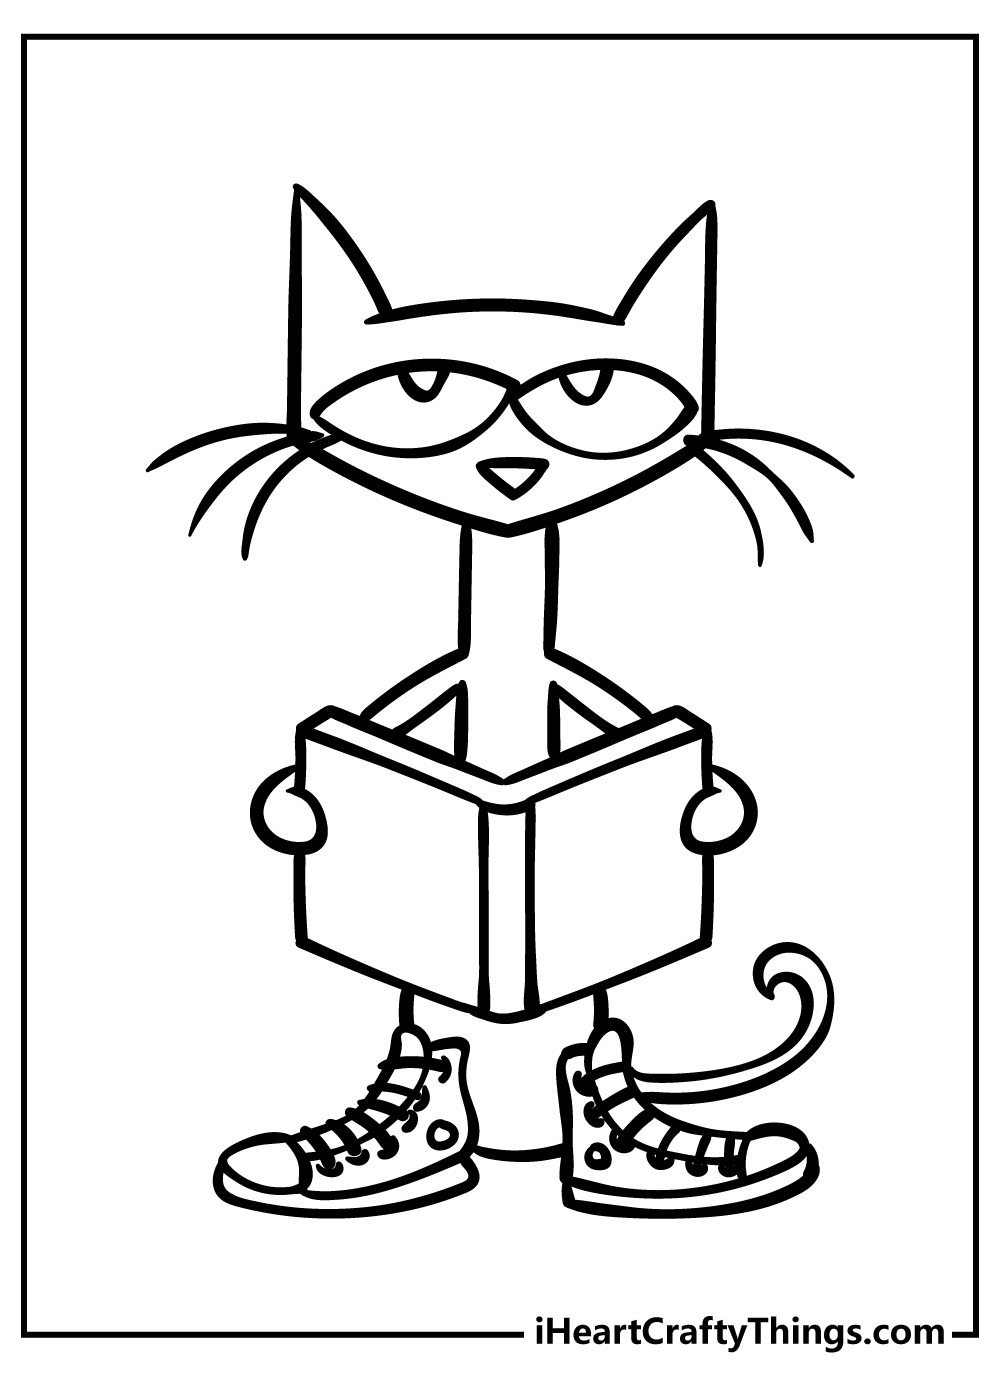 Pete The Cat Coloring Sheet for children free download